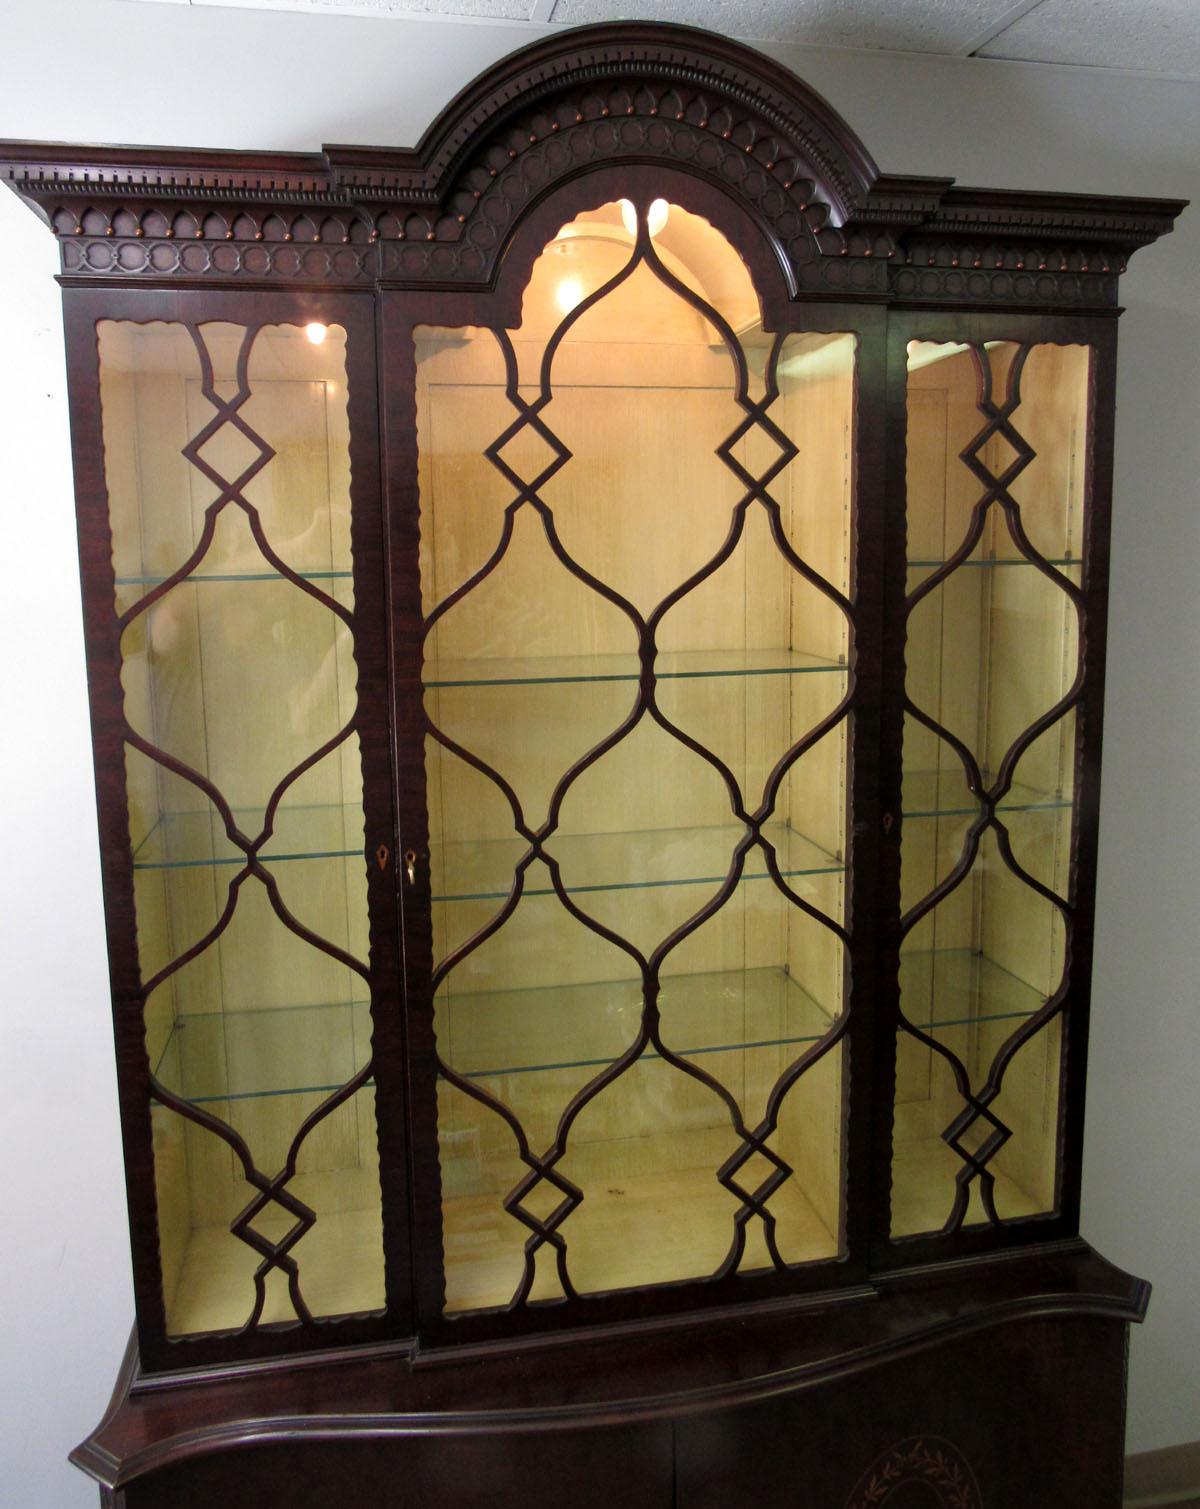 20th century English display cabinet in the Edwardian style.